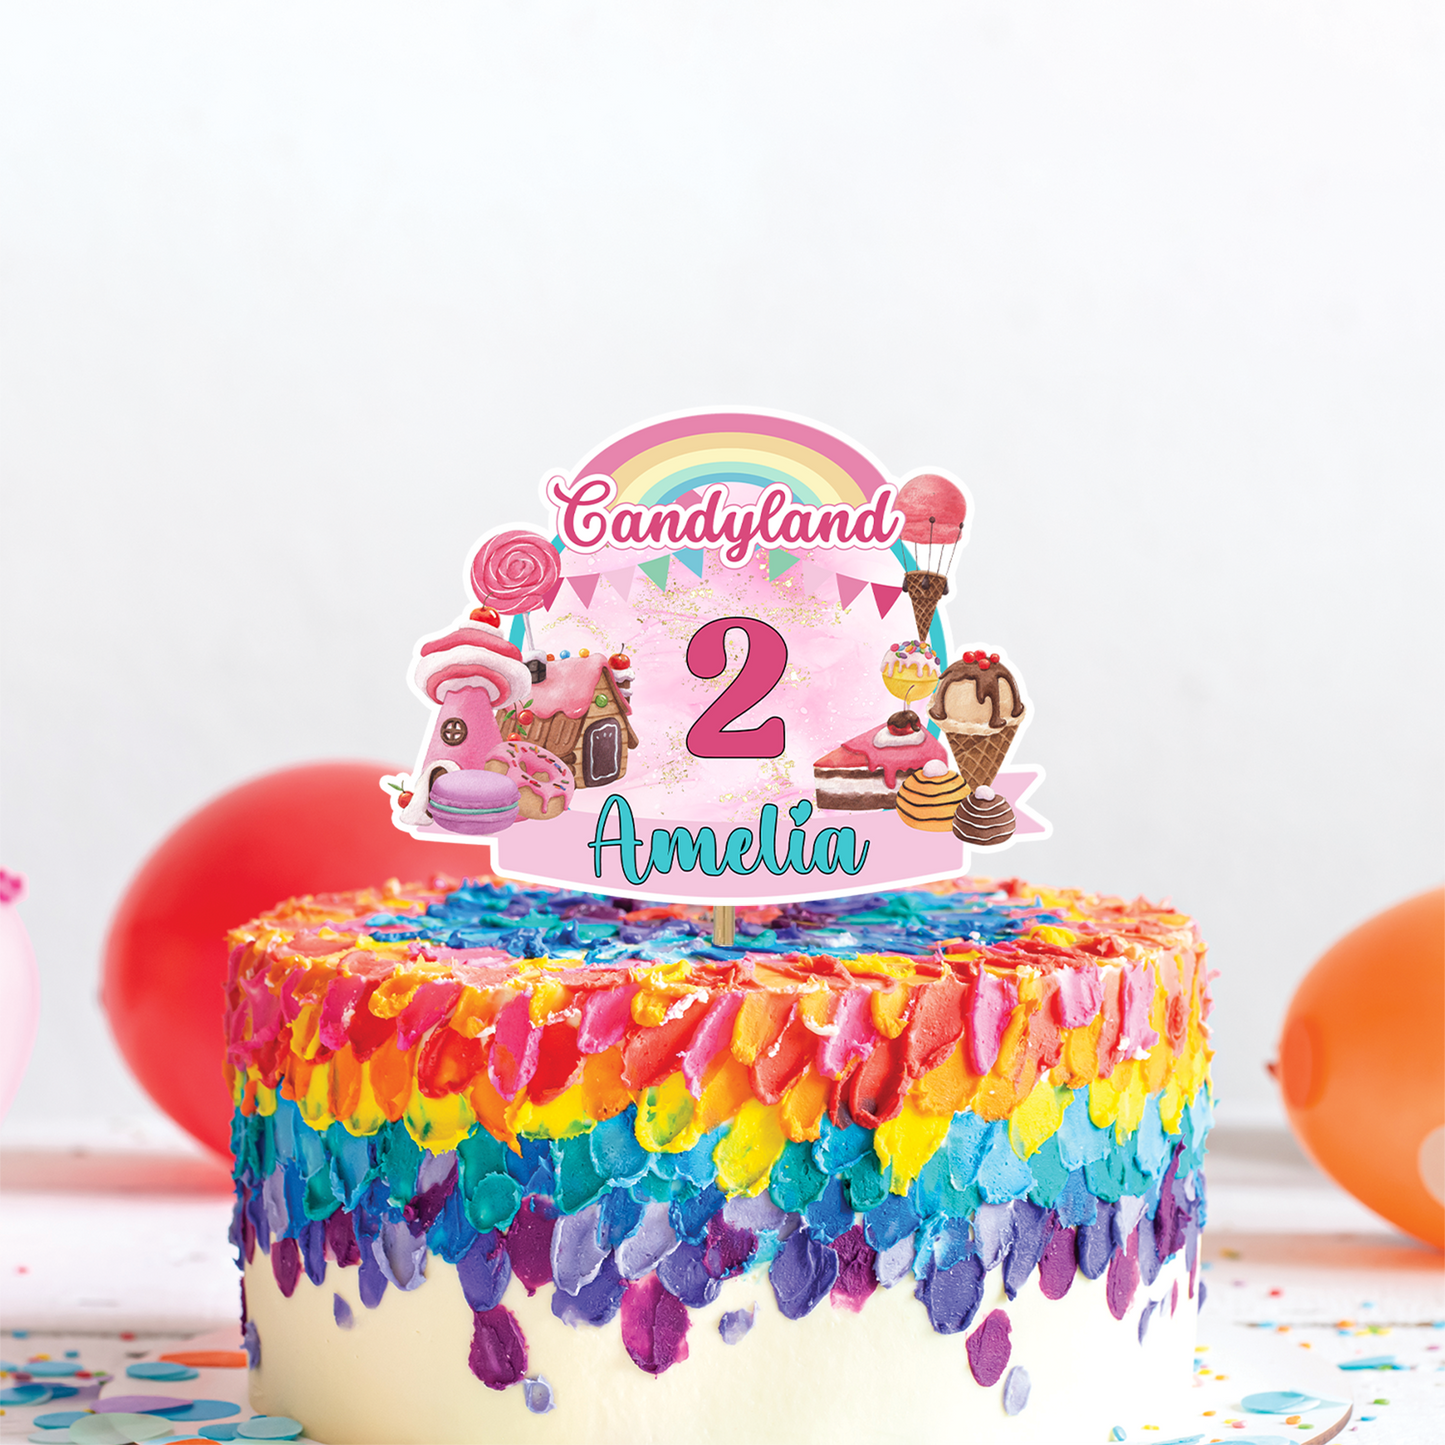 Personalized cake toppers with a Candy Land theme